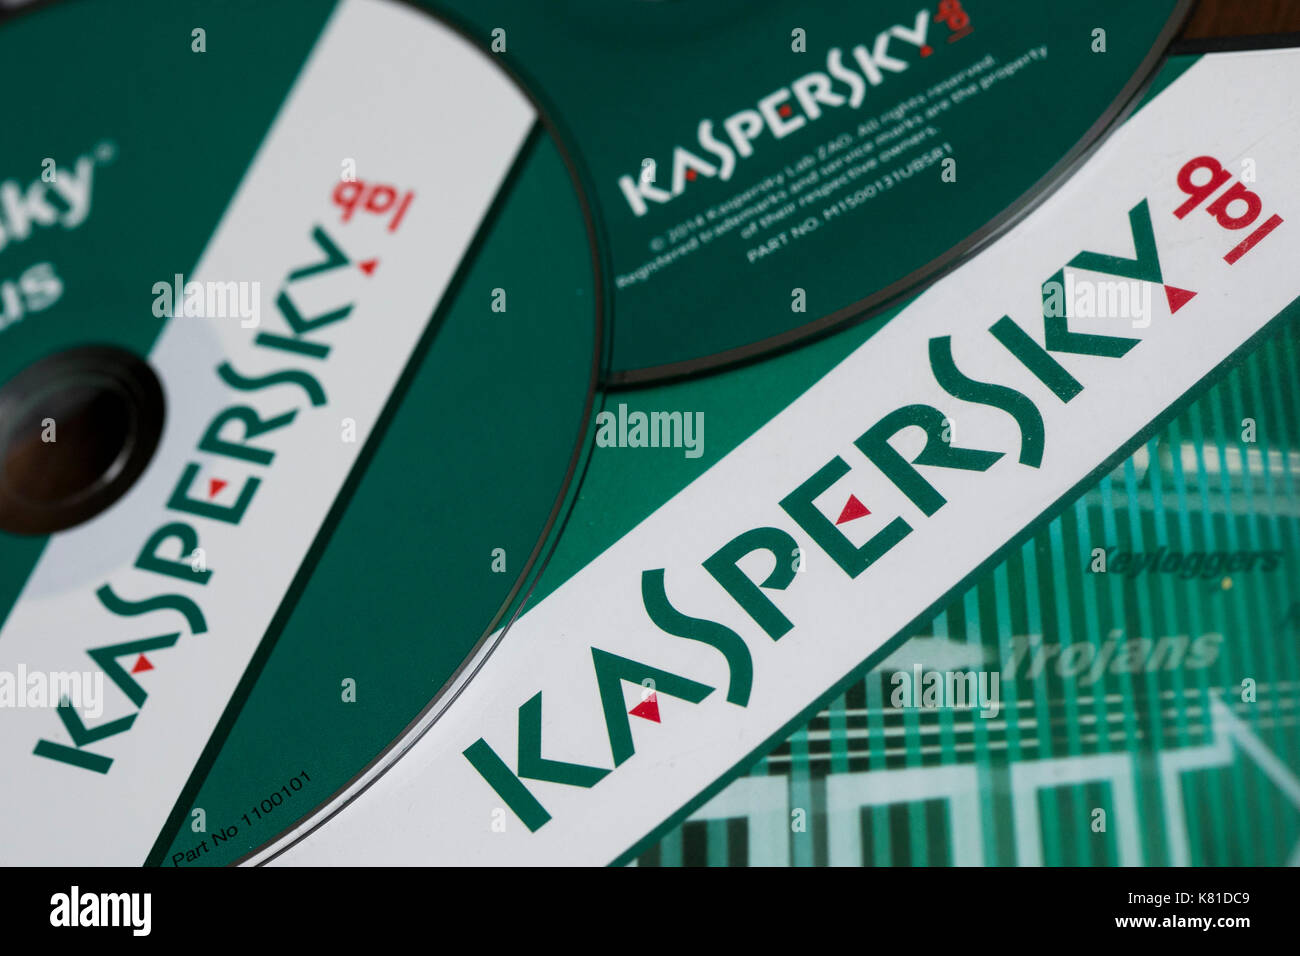 Kaspersky Lab Internet Security and Anti-Virus software products. The Russian software maker has come under scrutiny for it's close ties to the Russia Stock Photo